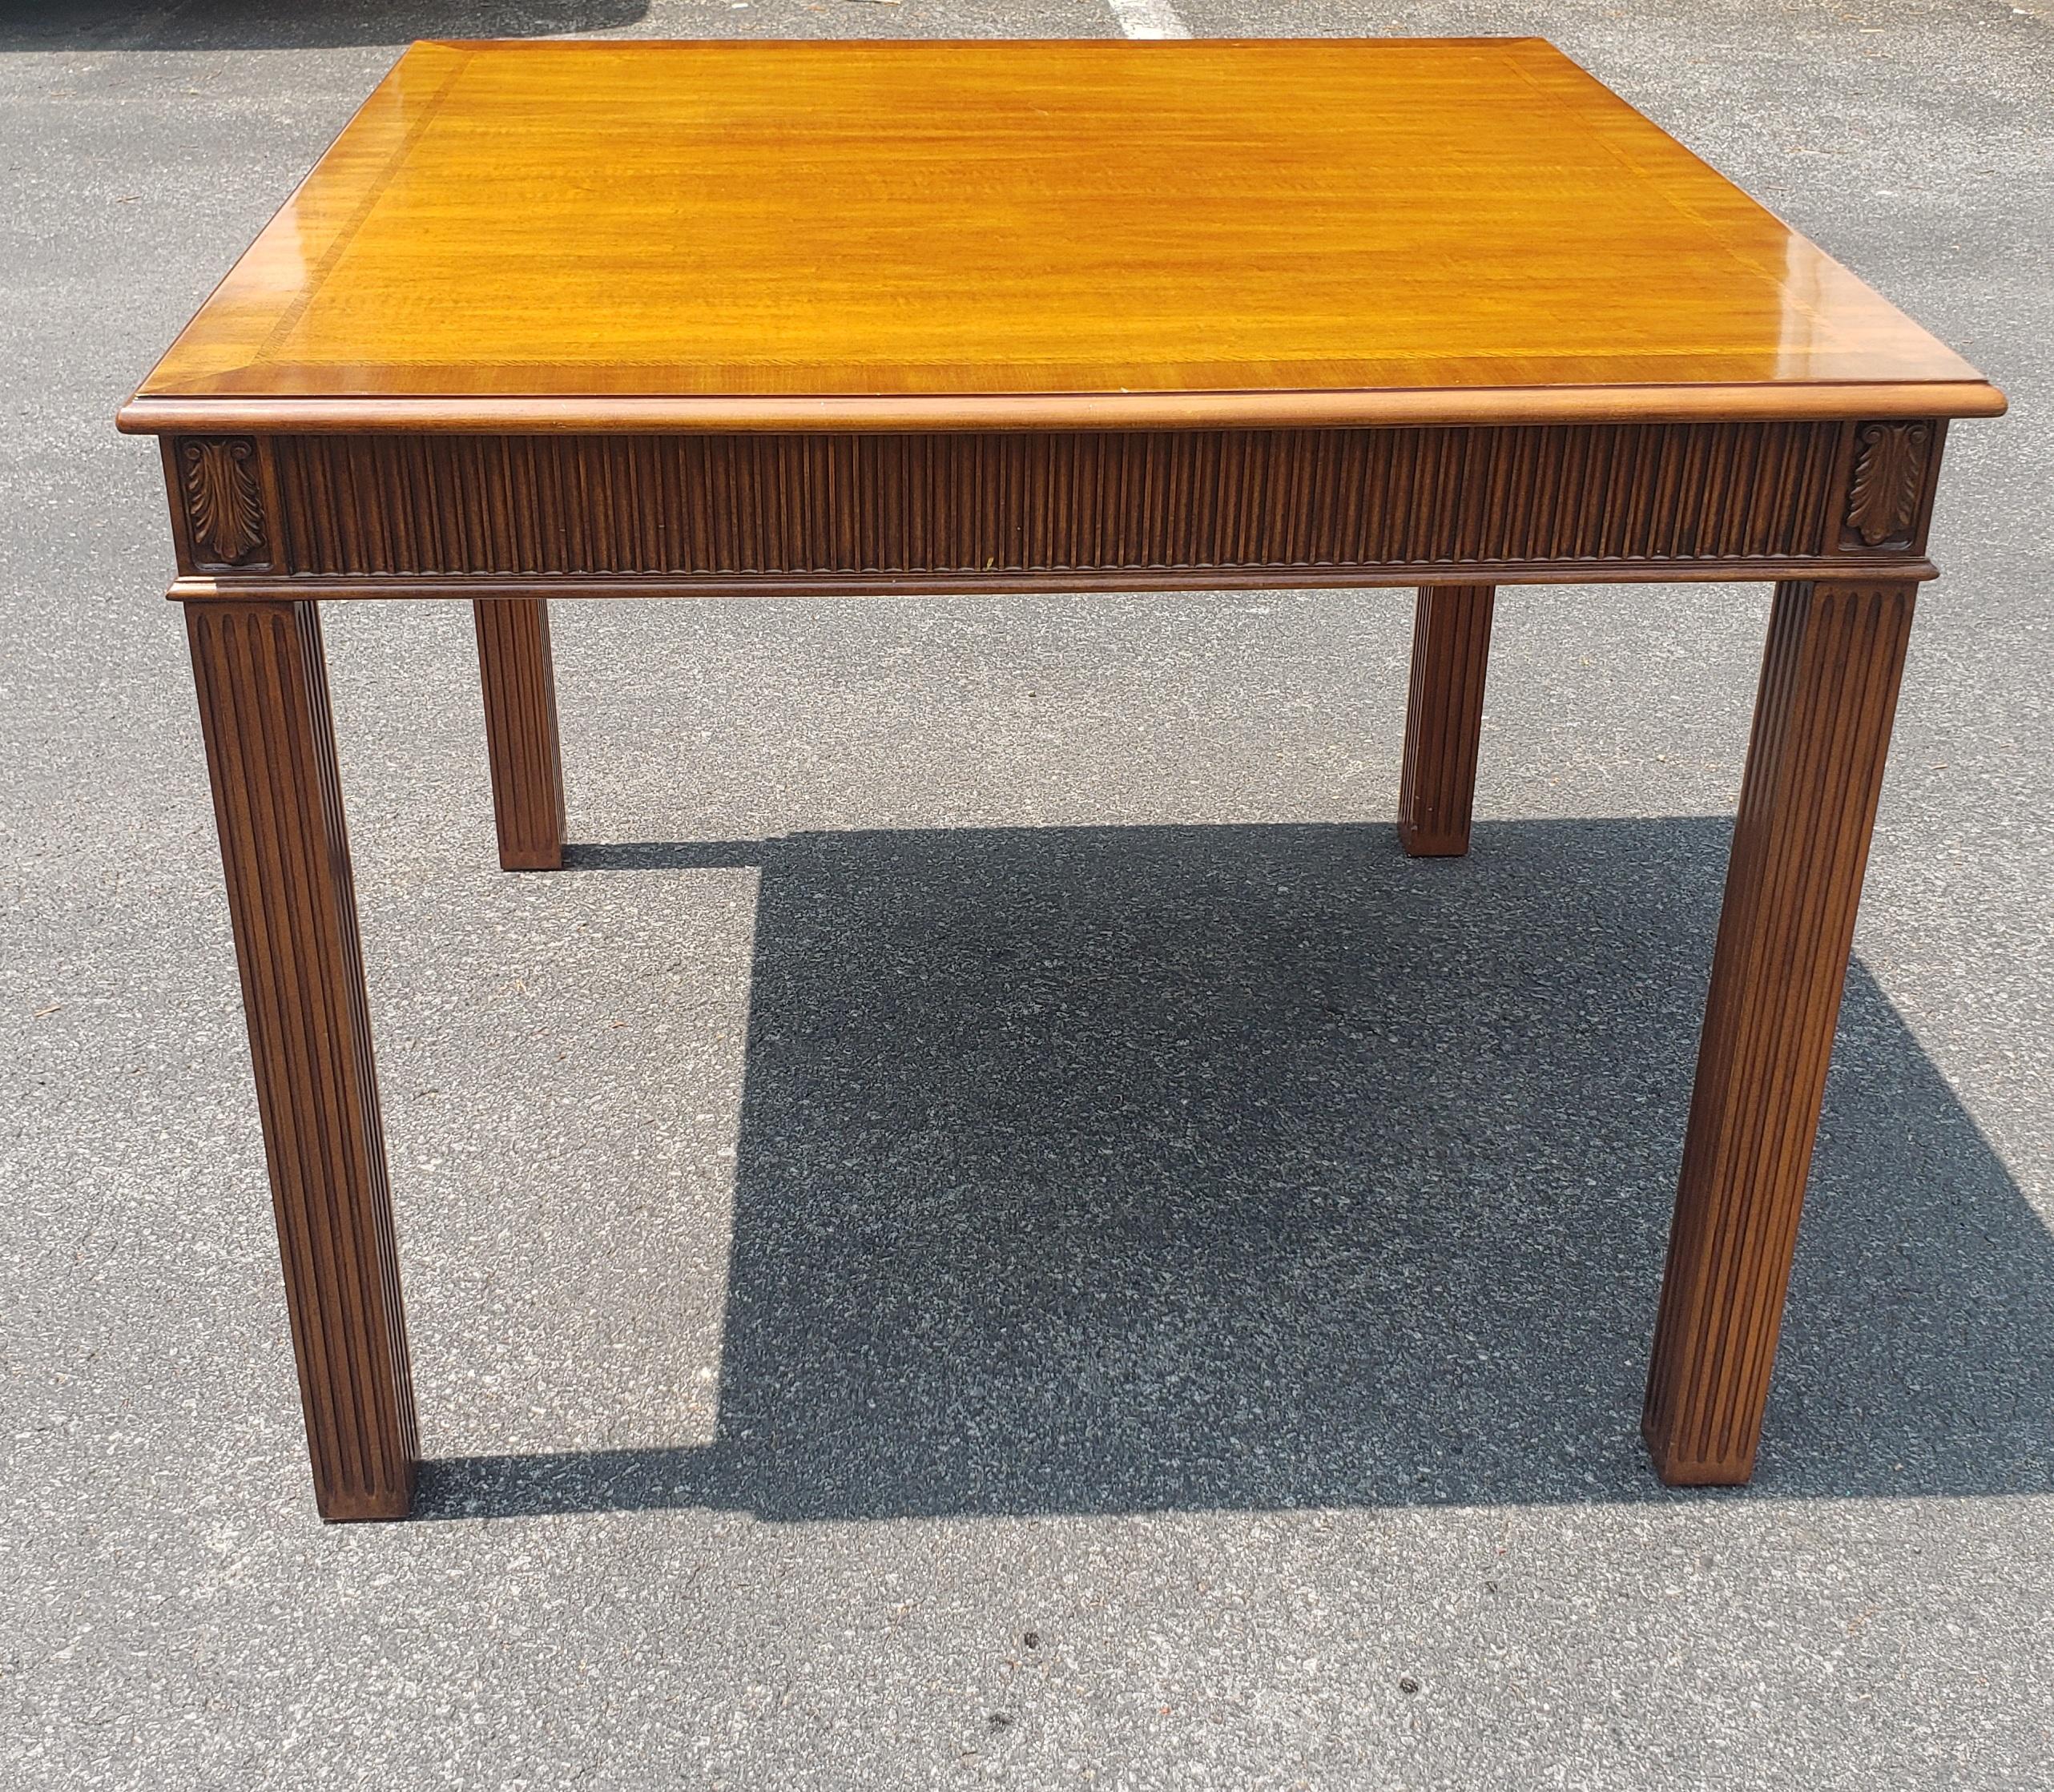 An exquisite Councill Furniture Carved and Banded top Blonde Mahogany Dining Table perfect for smaller spaces or kitchen. Well proportionate. Measures 38